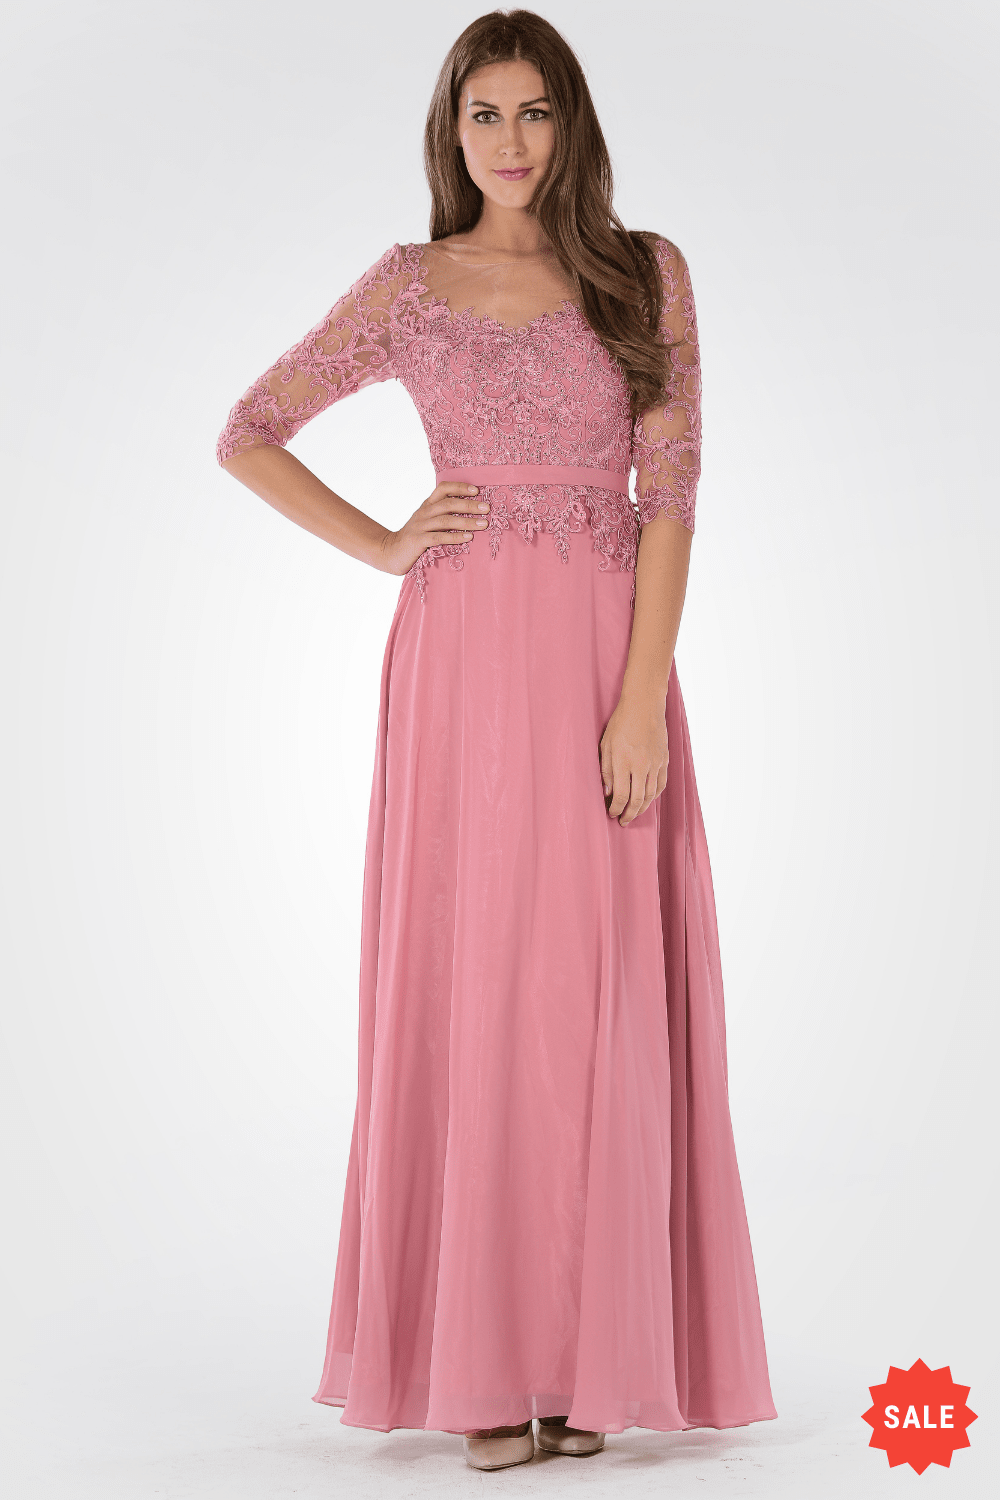 Long Dress with Illusion Lace Sleeves by Poly USA 7598